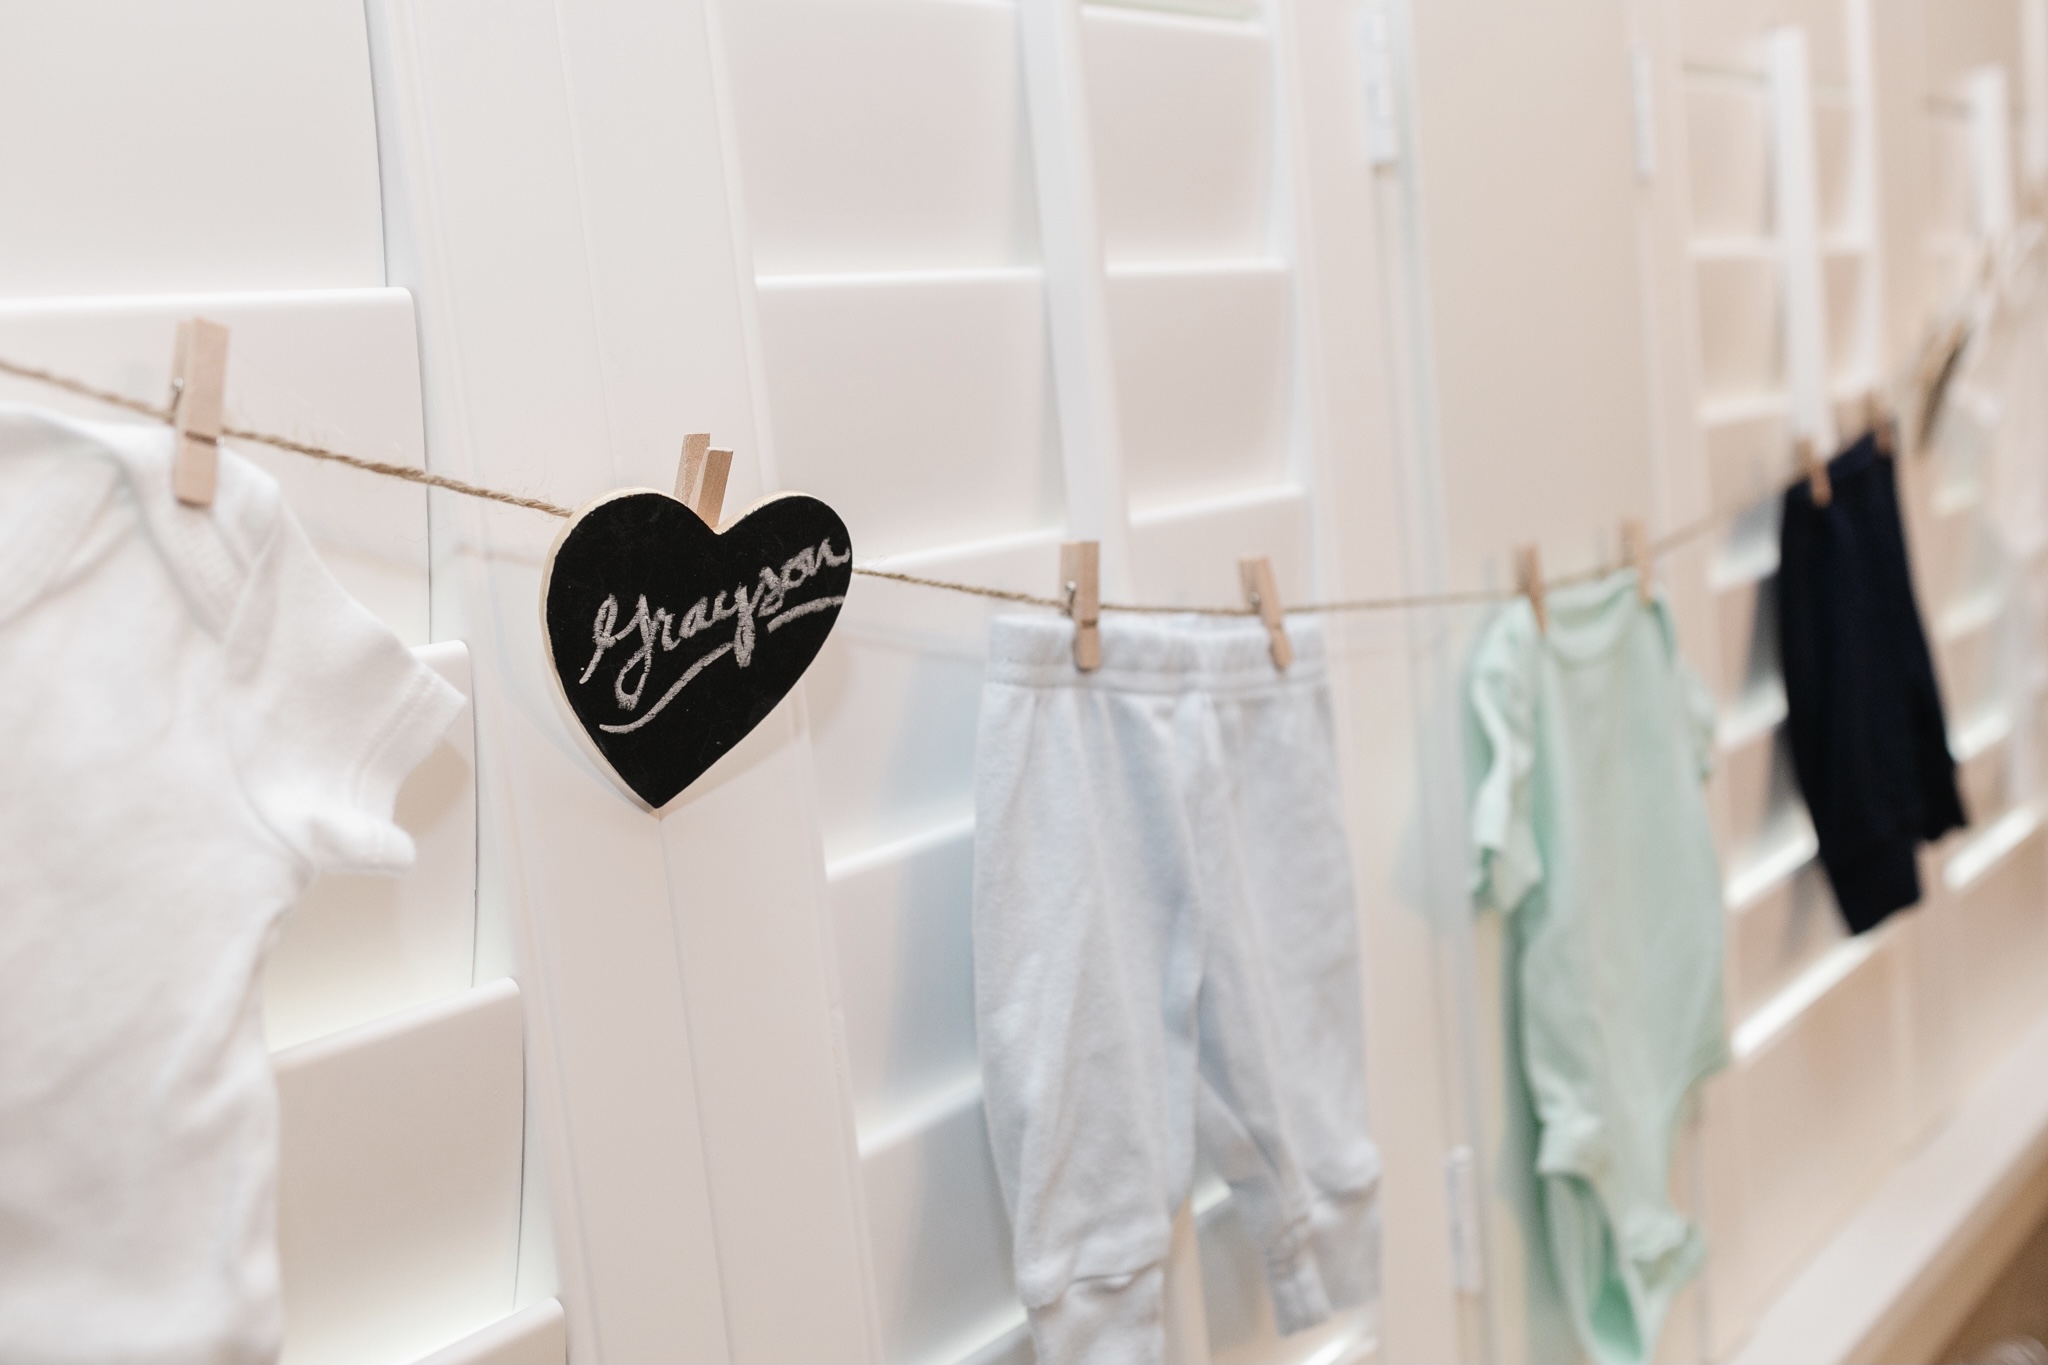 Rustic Baby Shower theme by top Memphis lifestyle mommy blogger, Walking in Memphis in High Heels.